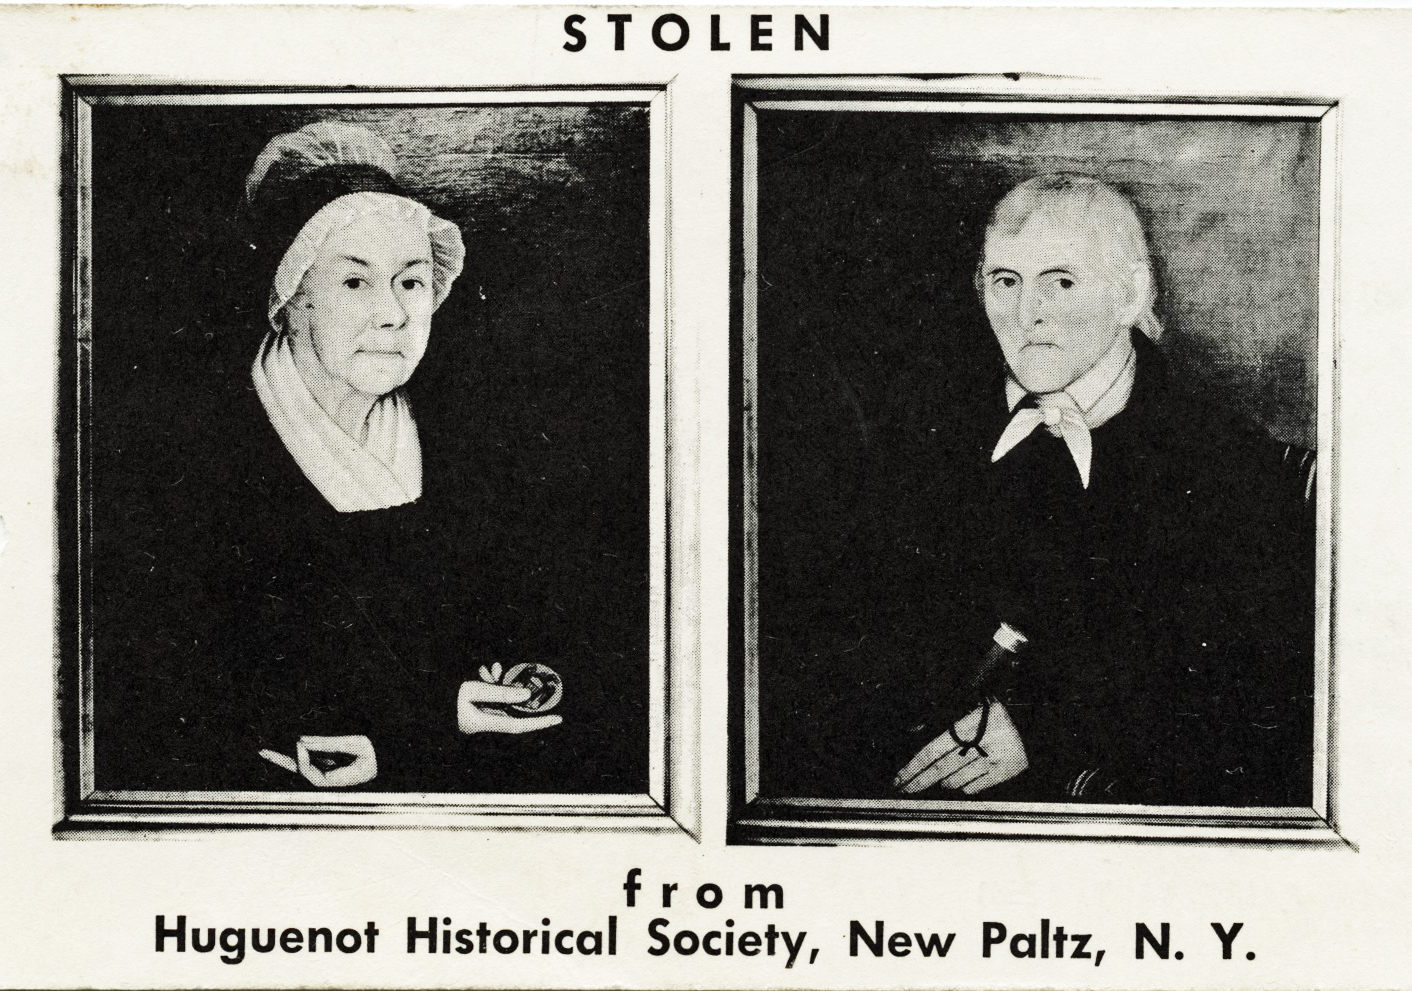 Image of a black and white postcard distributed by Historic Huguenot Street (HHS) in 1972, which offered a reward for the return of the paintings. Courtesy of Historic Huguenot Street